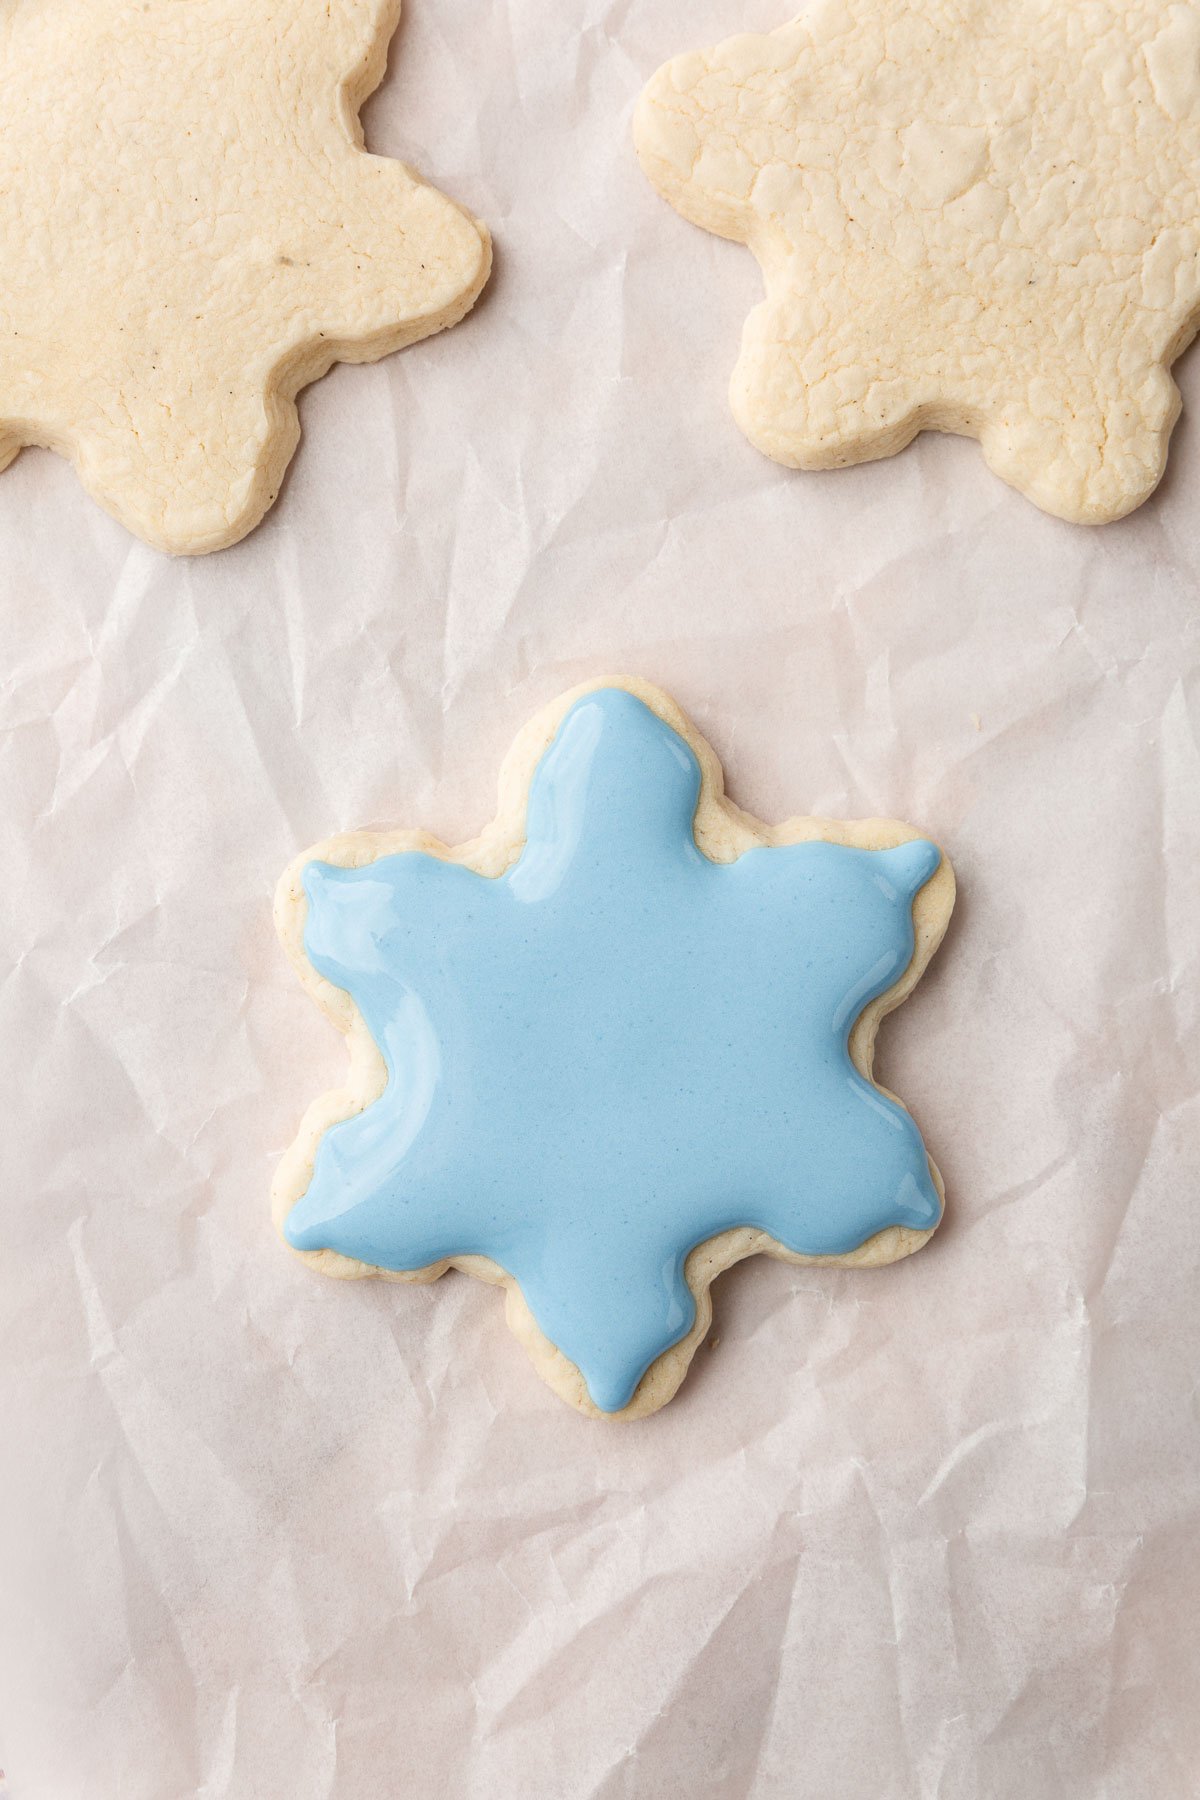 Three gluten-free snowflake cookies on a piece of parchment paper with one filled with blue royal icing.